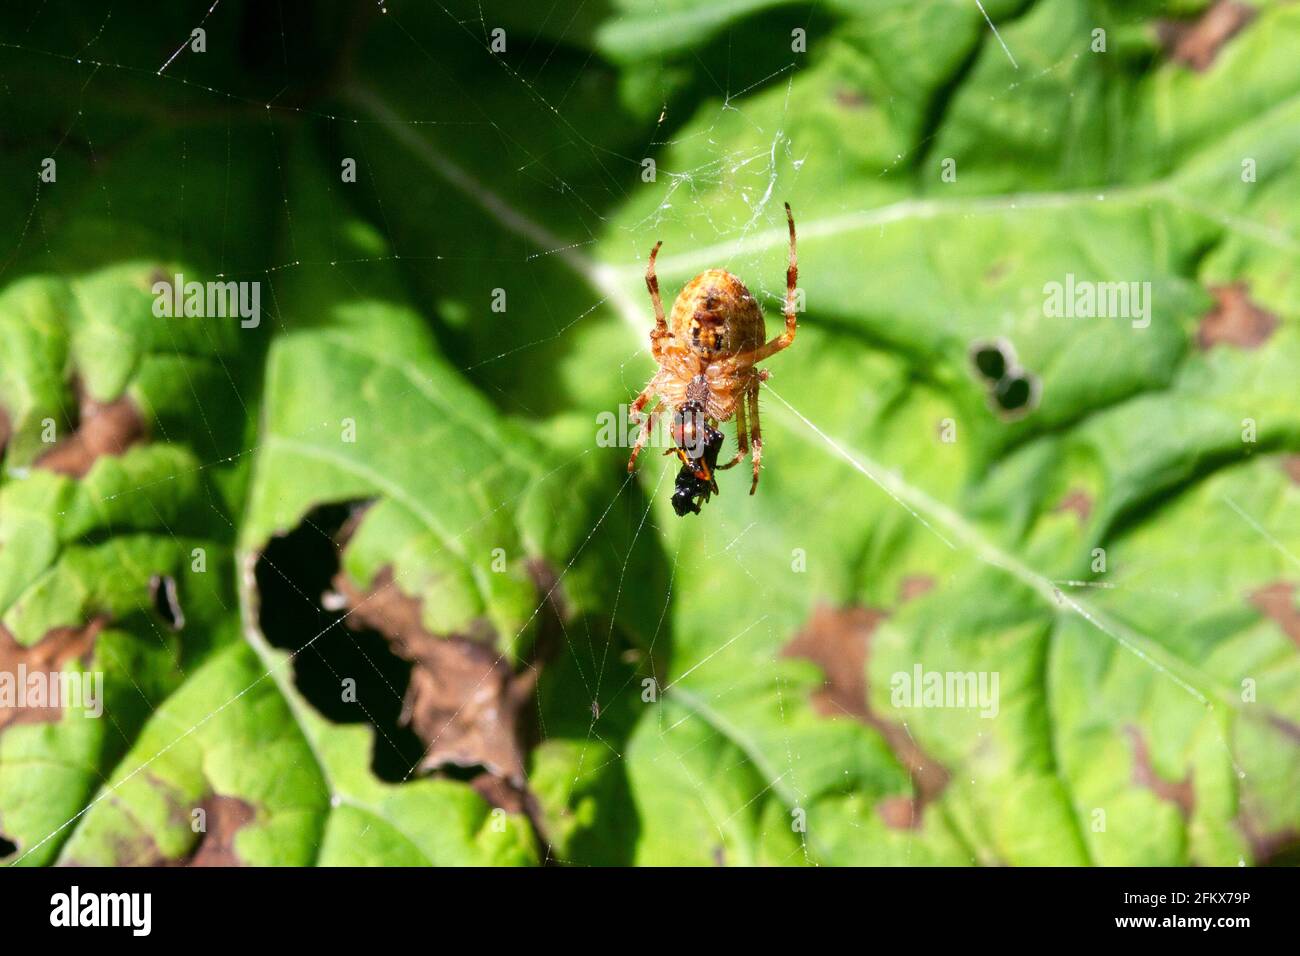 Real Garden Spider With Prey Stock Photo